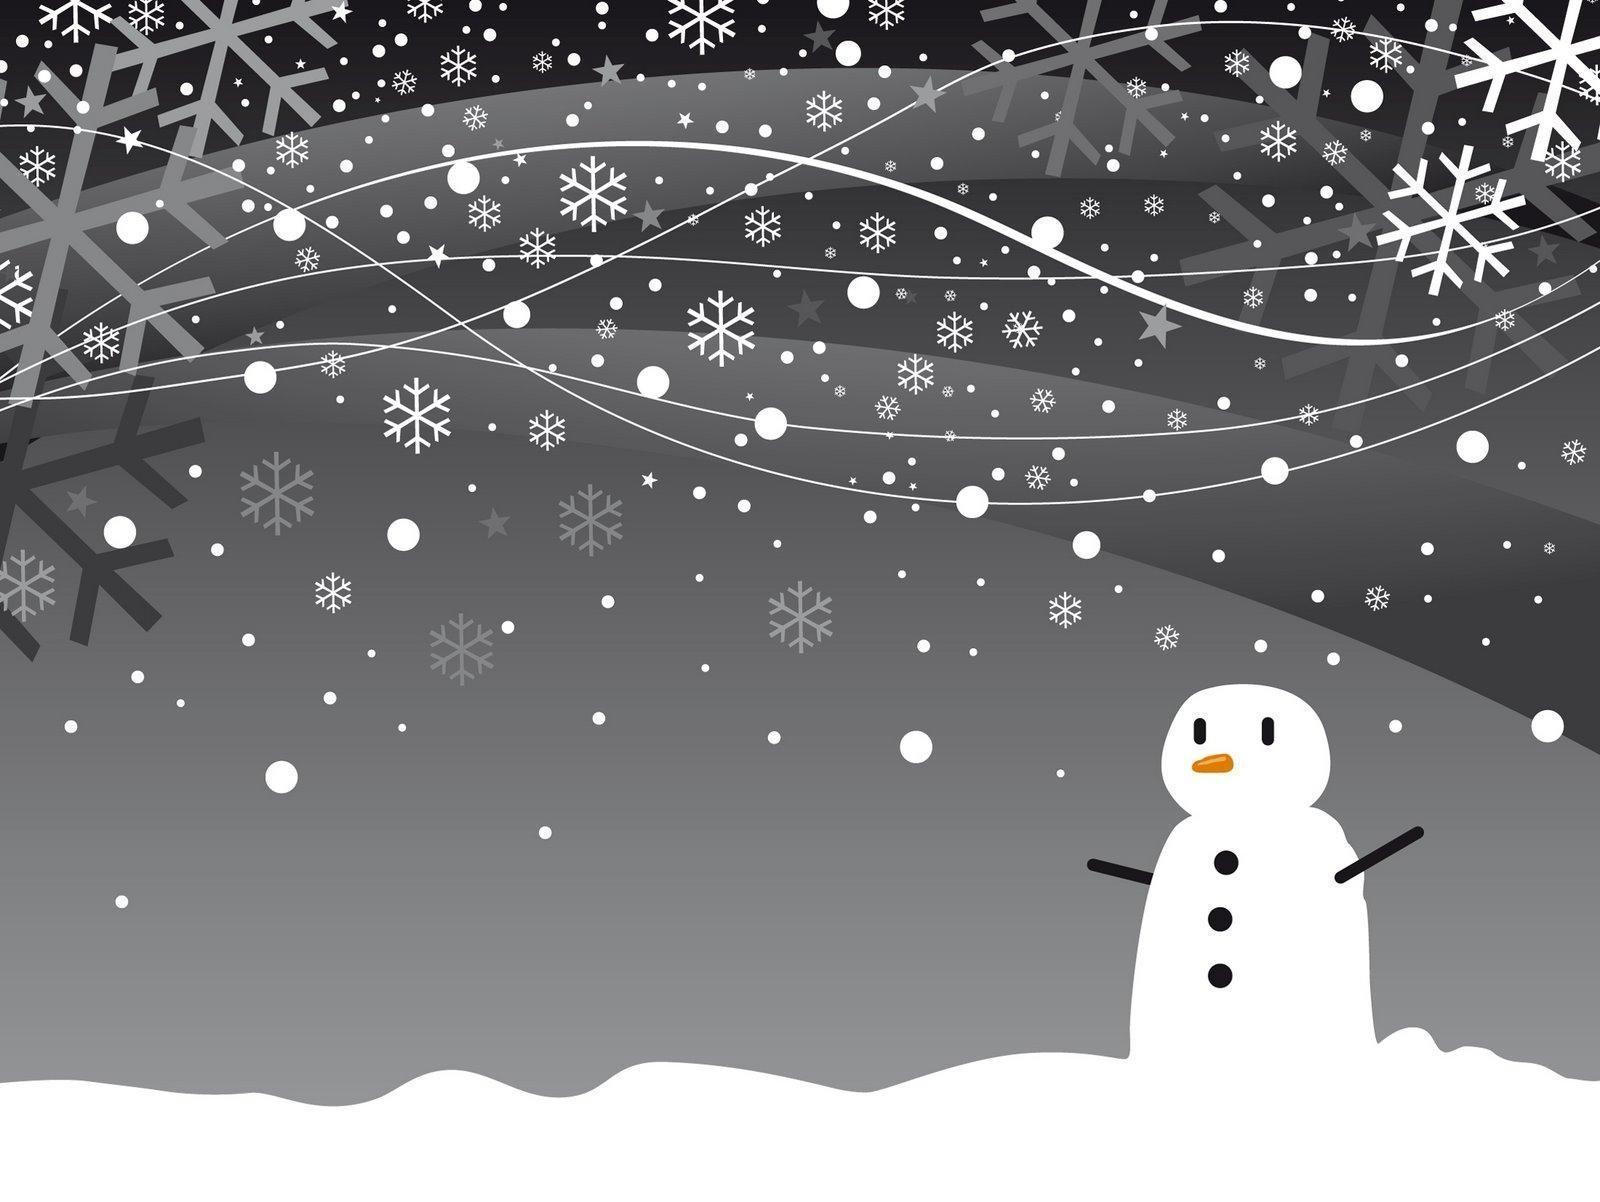 Black and White Snowman Wallpaper at